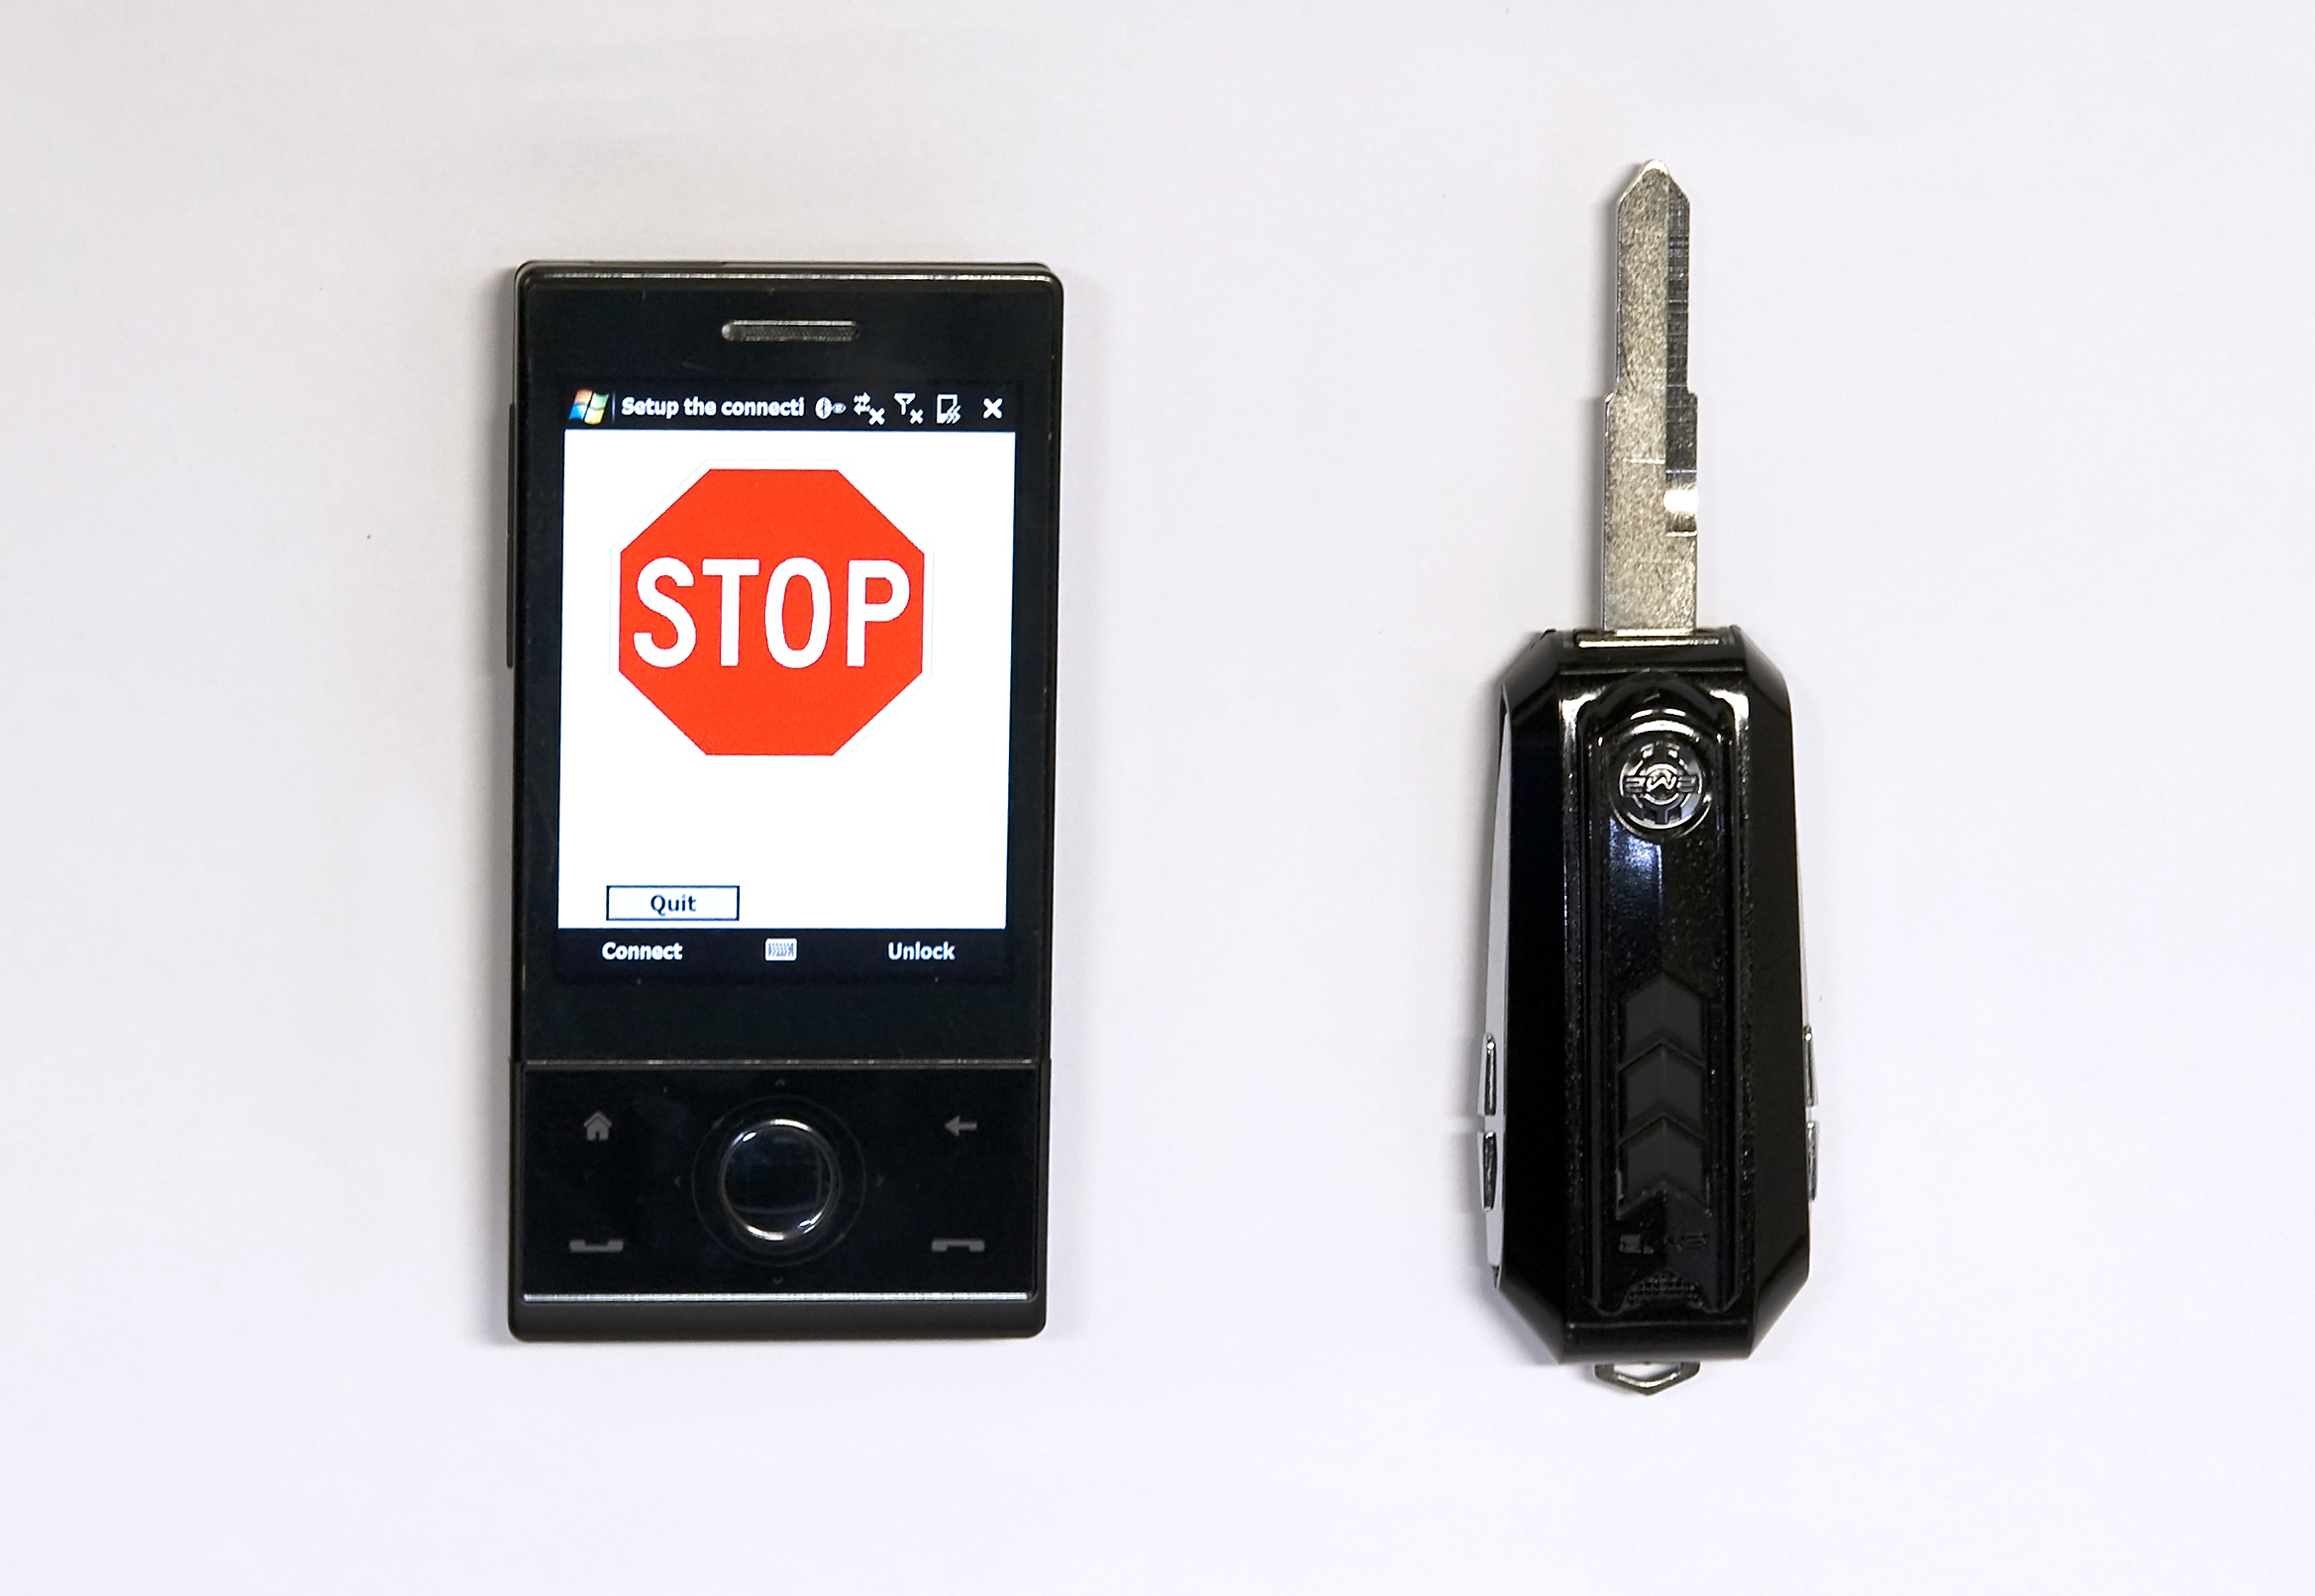 University of Utah engineers have invented a wireless car key device (sample shown at right) to stop teenage motorists from talking on their cell phone or sending text messages while driving. Each driver of a car would have a separate key device. When the key is extended from the device, it sends a signal to the teenage driver's phone, putting the phone in "driving mode" so it cannot be used to talk or send texts. The phone displays a stop sign while in driving mode. The University has licensed the Key2SafeDribving technology to a private company, which hopes to have the device on the market within six months, possibly through cell phone plan providers.